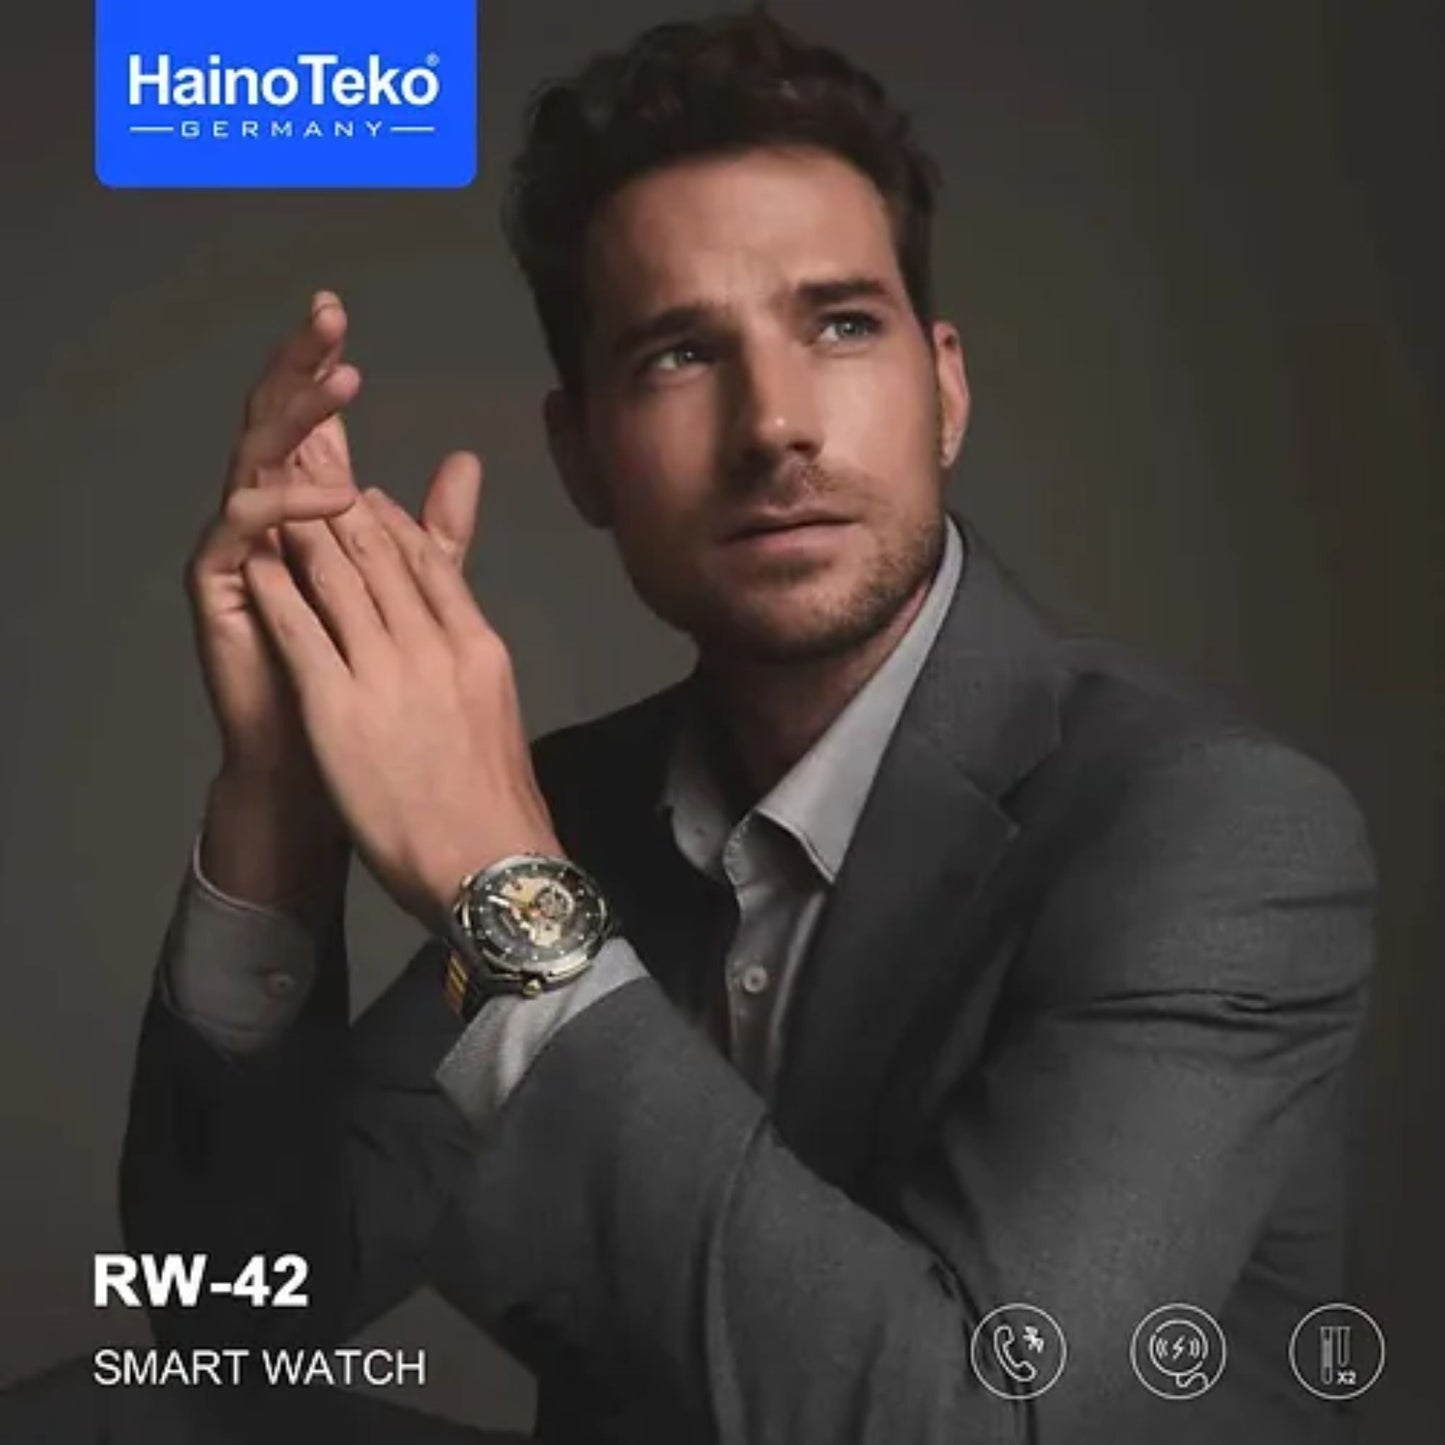 Haino Teko Germany RW-42 Round Shape Large Screen AMOLED Display Smart Watch With 2 Pair Straps and Wireless Charger For Men's and Boys